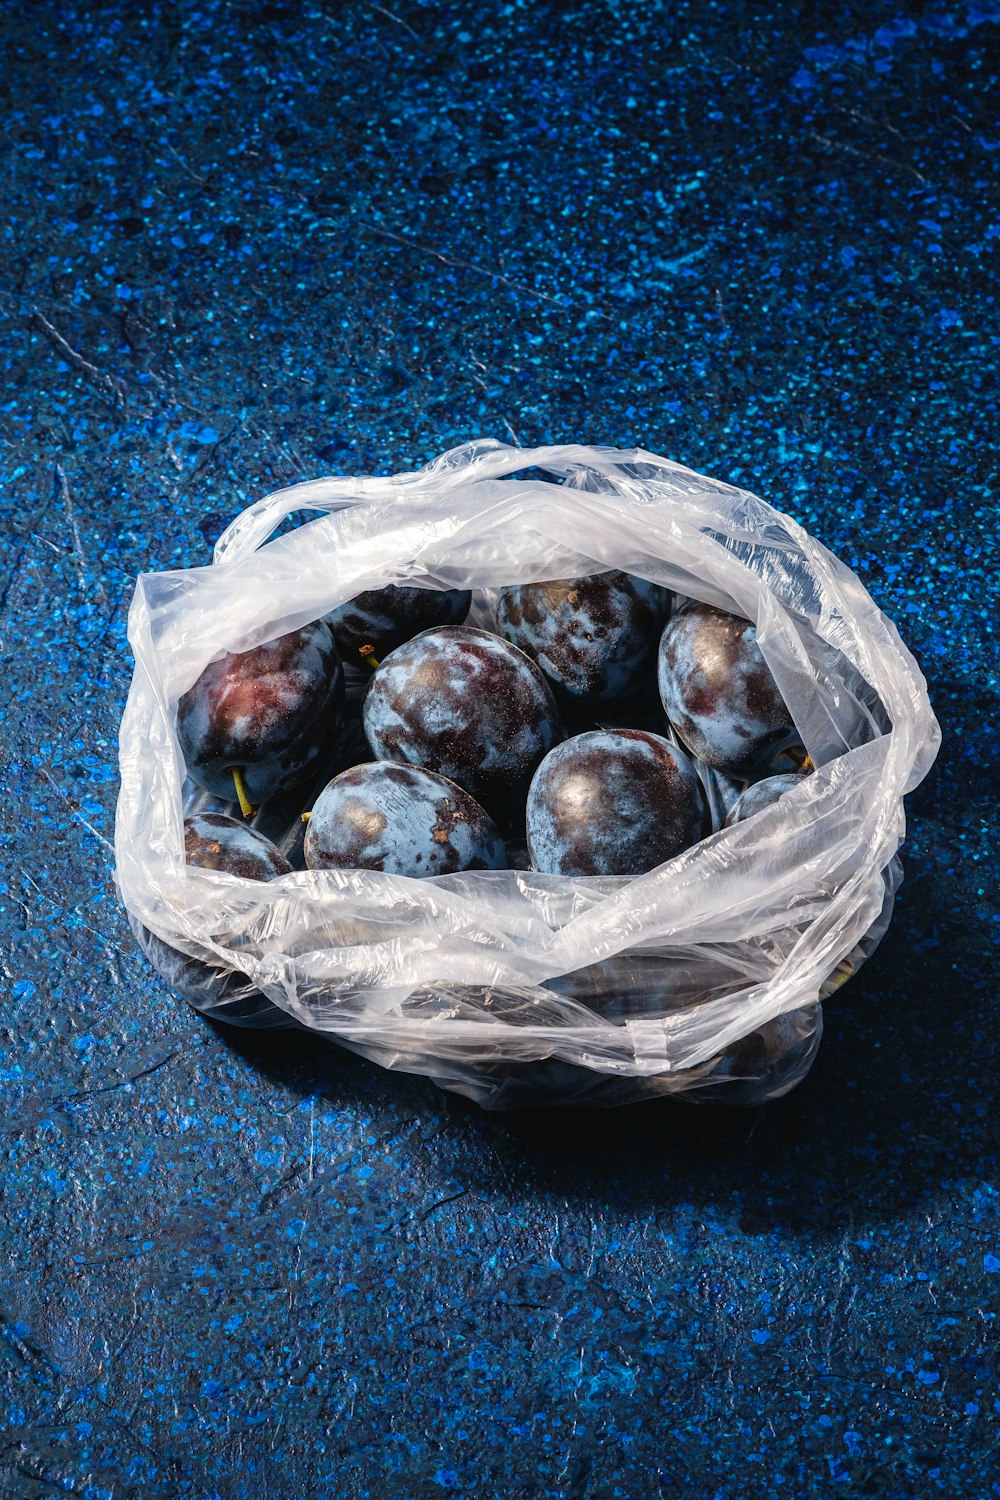 a plastic bag filled with plums on a blue surface